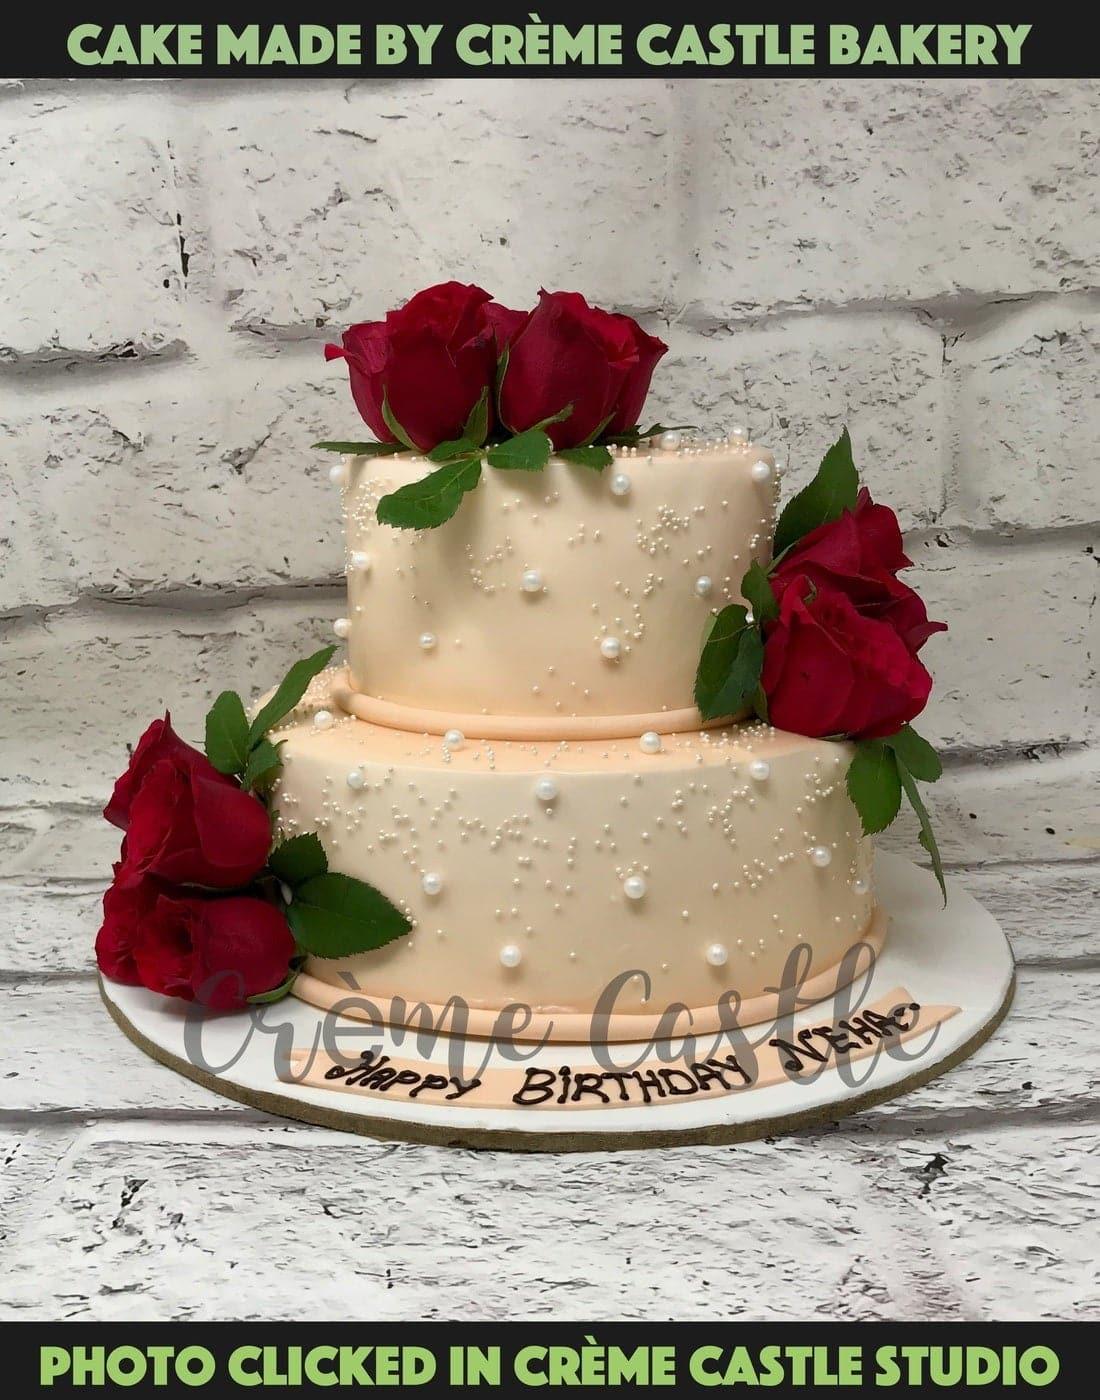 Four-Tier White Wedding Cake with Red Roses